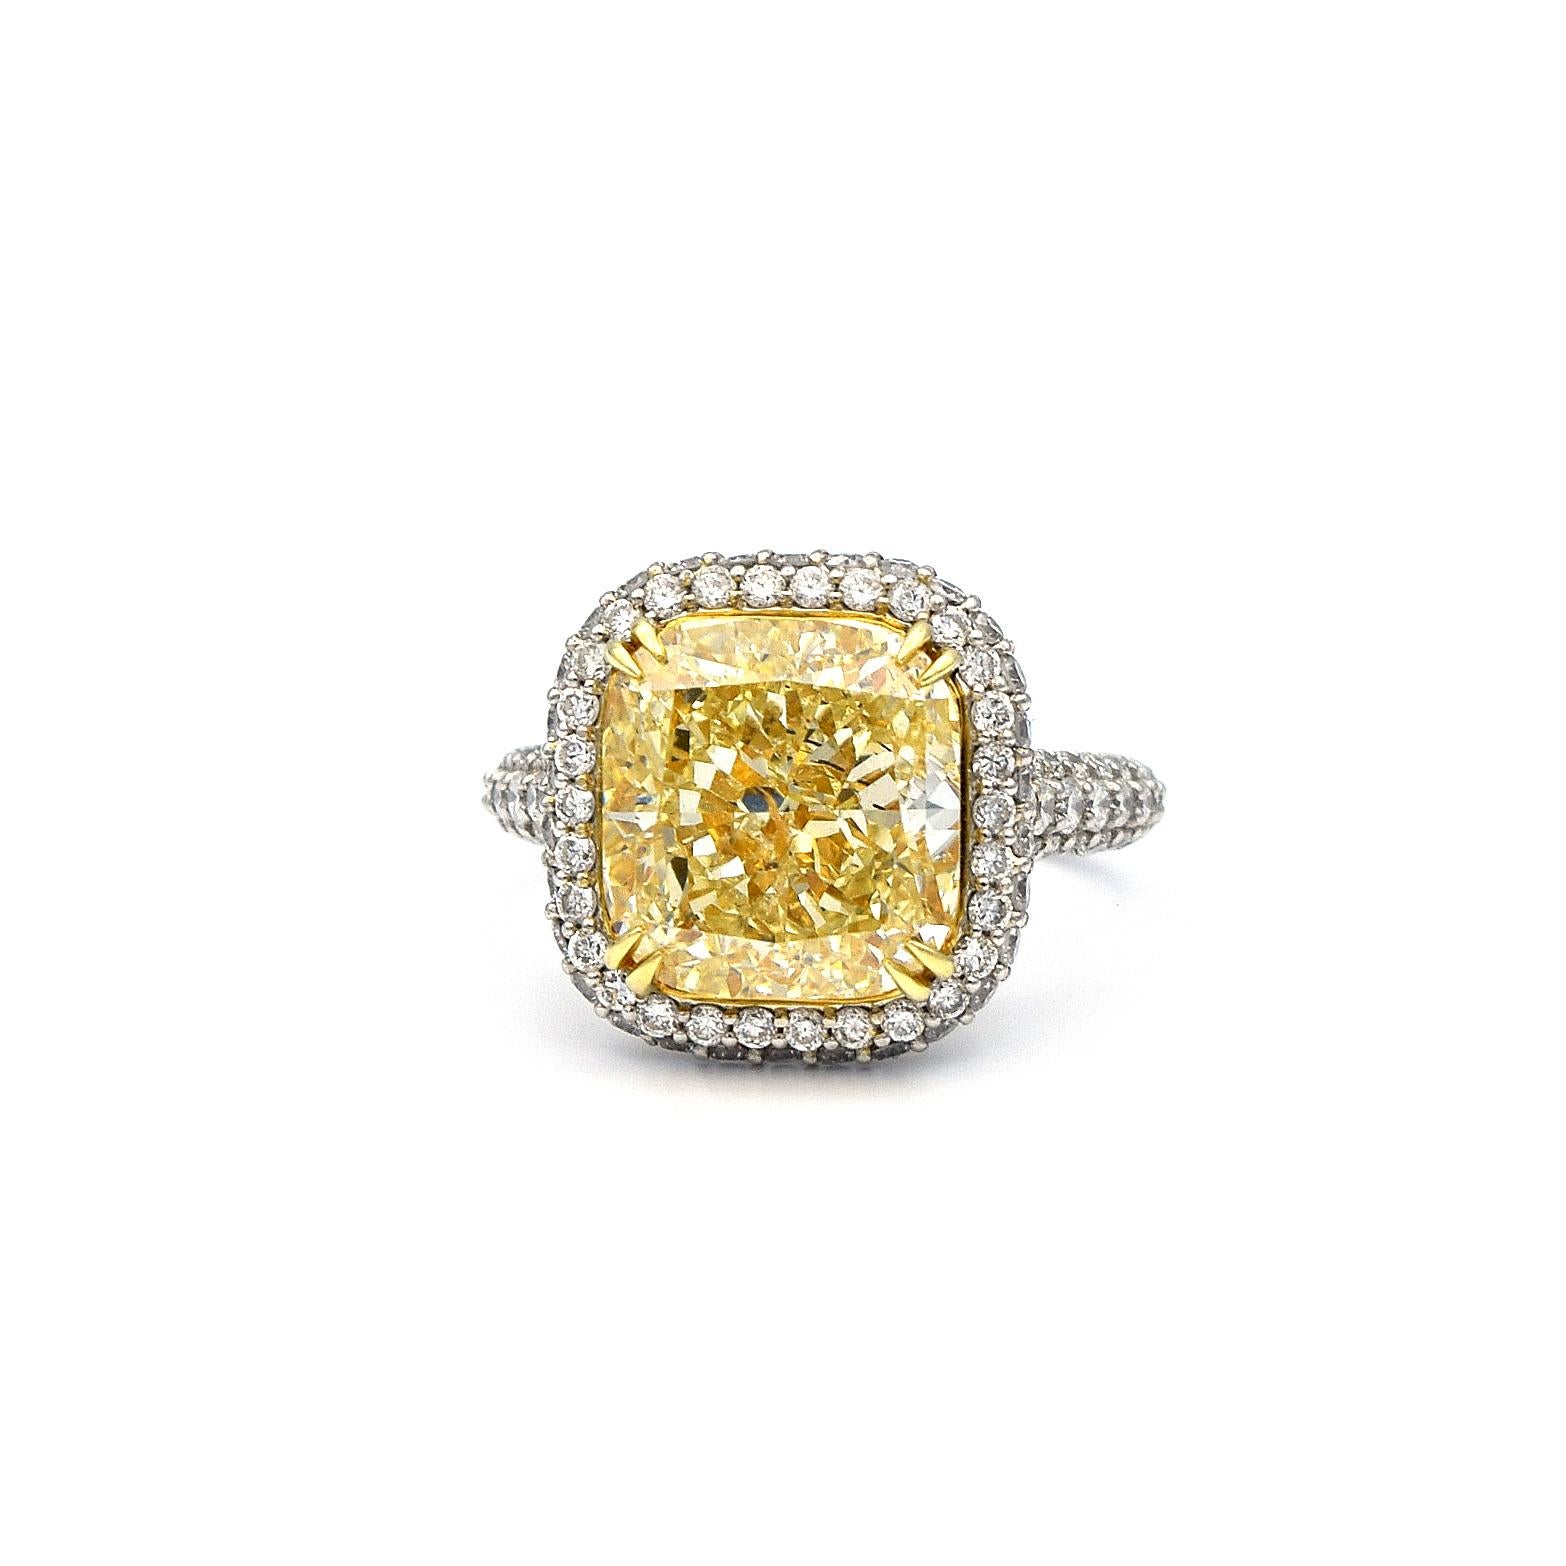 This lovely ring has a center stone weighting 6.58 Carat, is EGL Certified Fancy Light Yellow Cushion SI2. The ring also has 1.35 Carats of White Pave Diamonds and is mounted in Platinum and 18K White Gold.
Ring size is 5.75